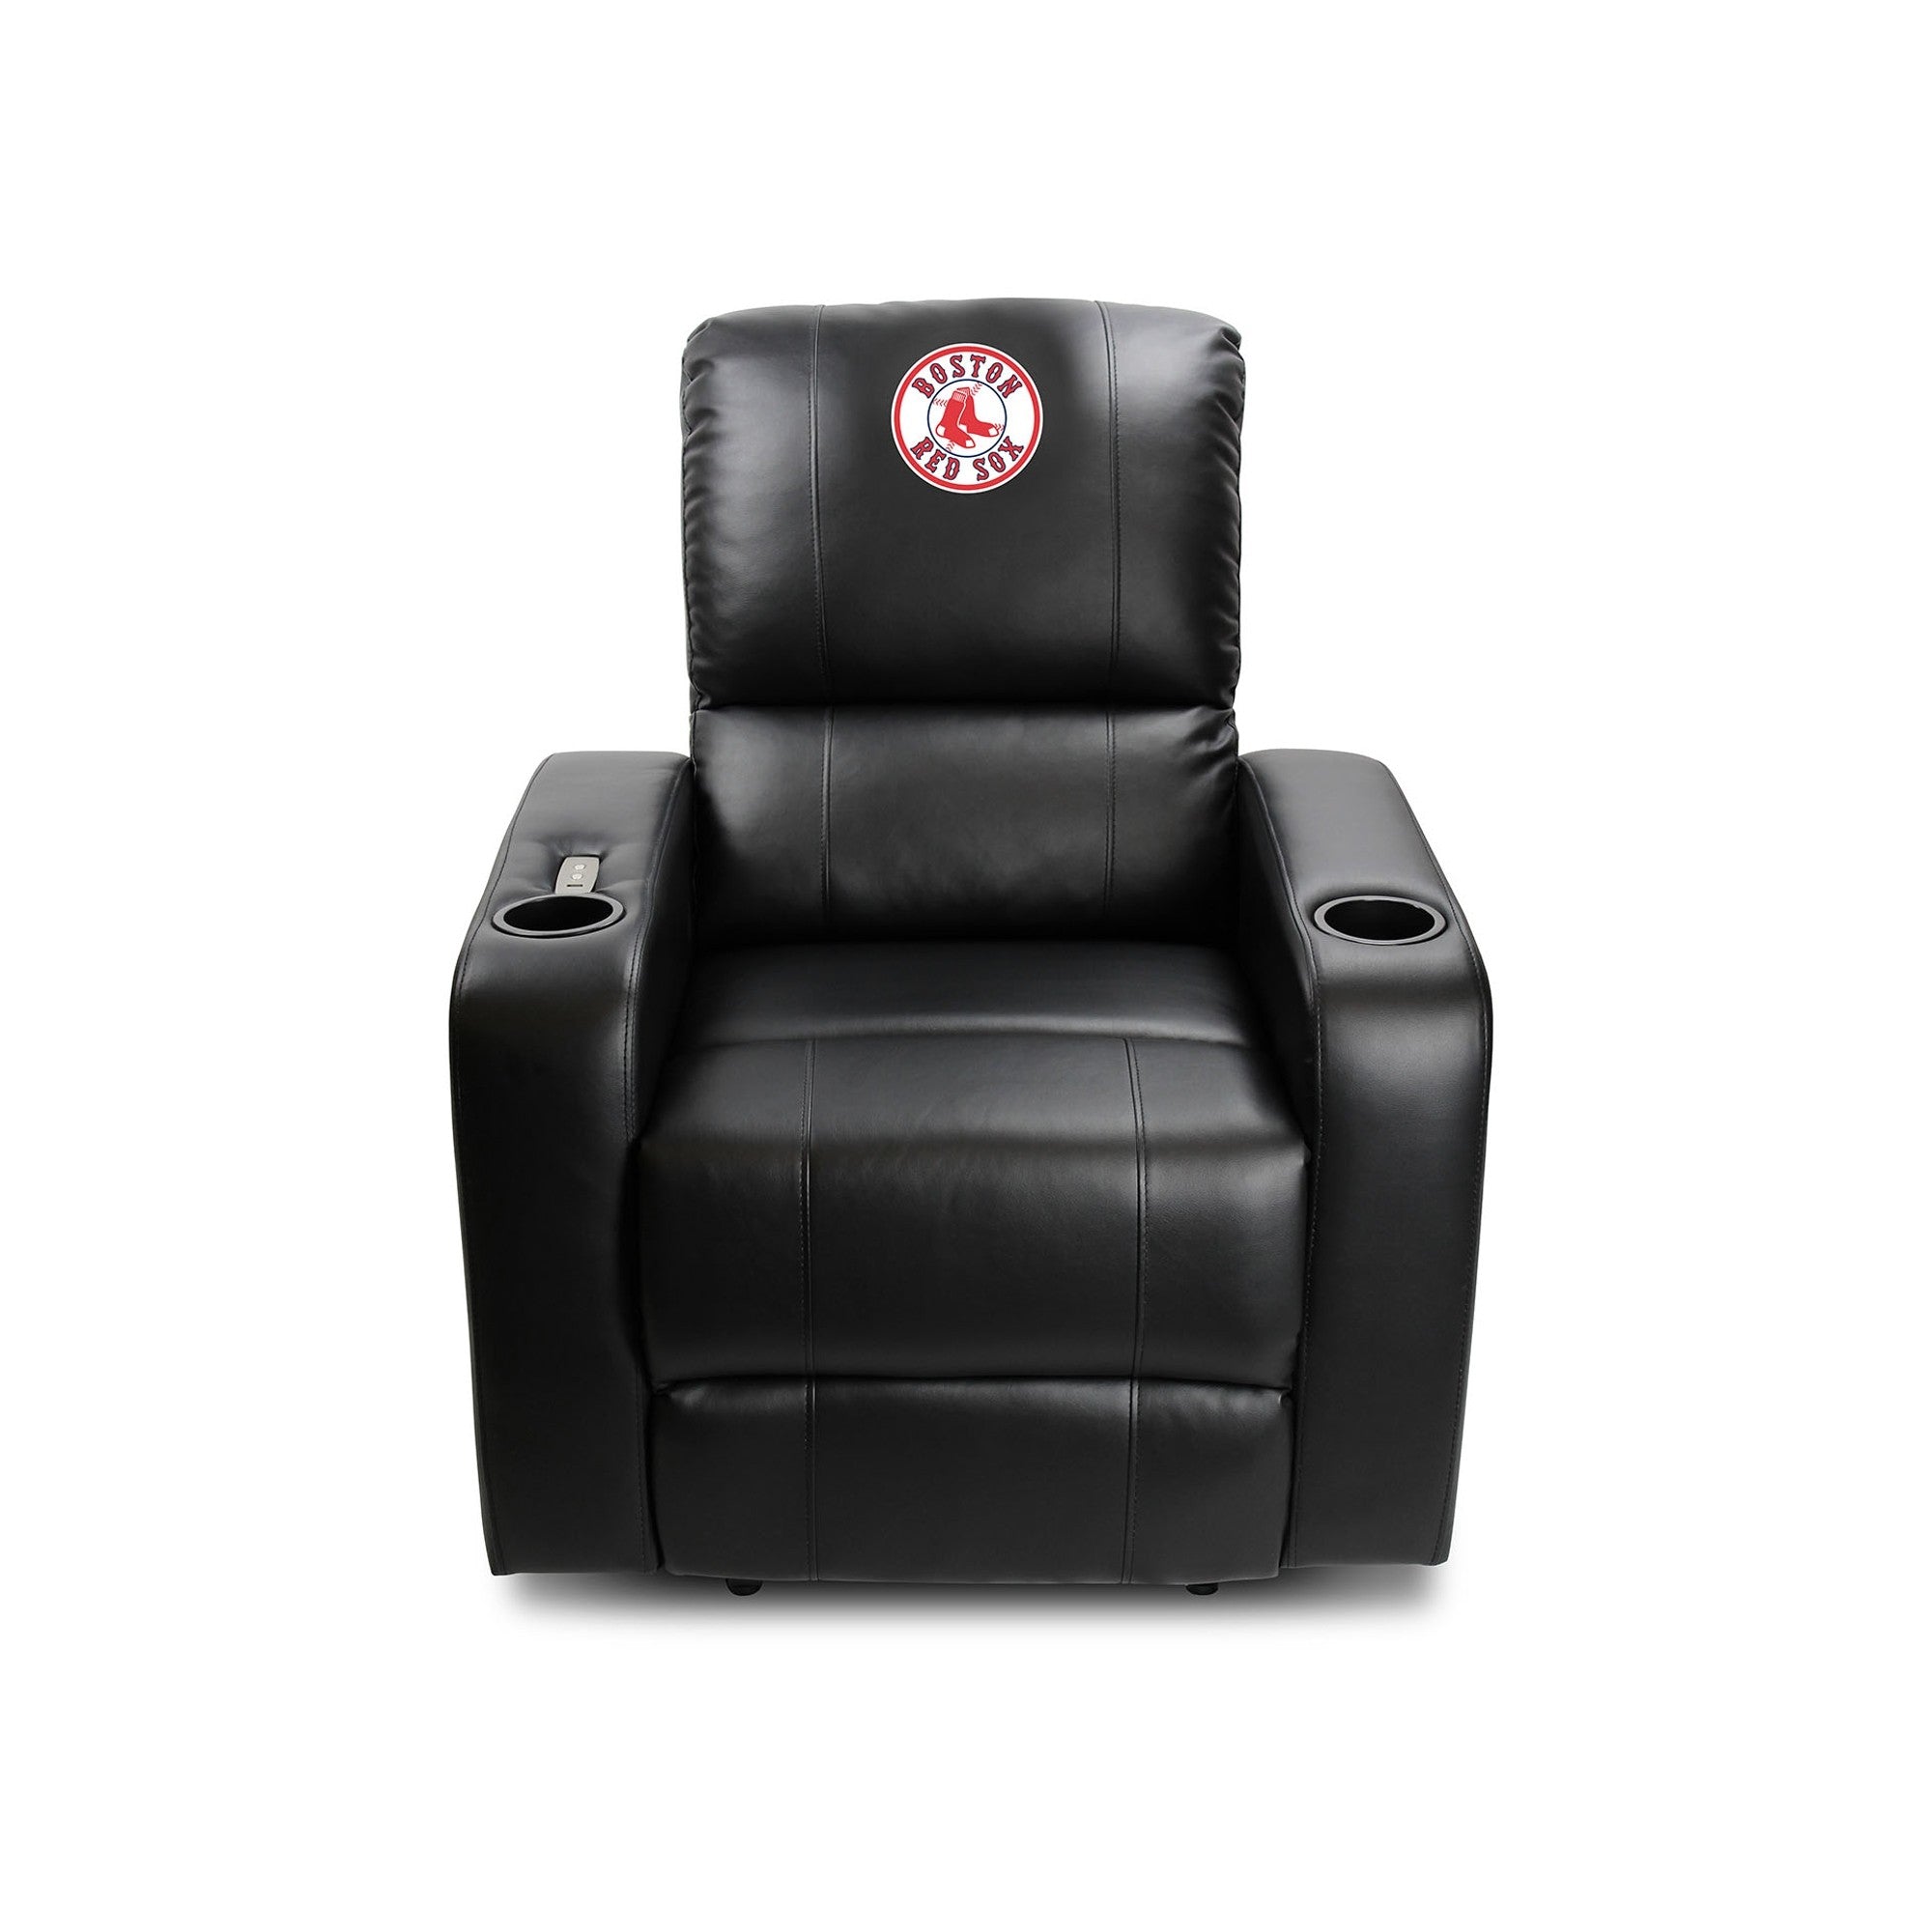 Imperial Boston Red Sox Power Theater Recliner With USB Port